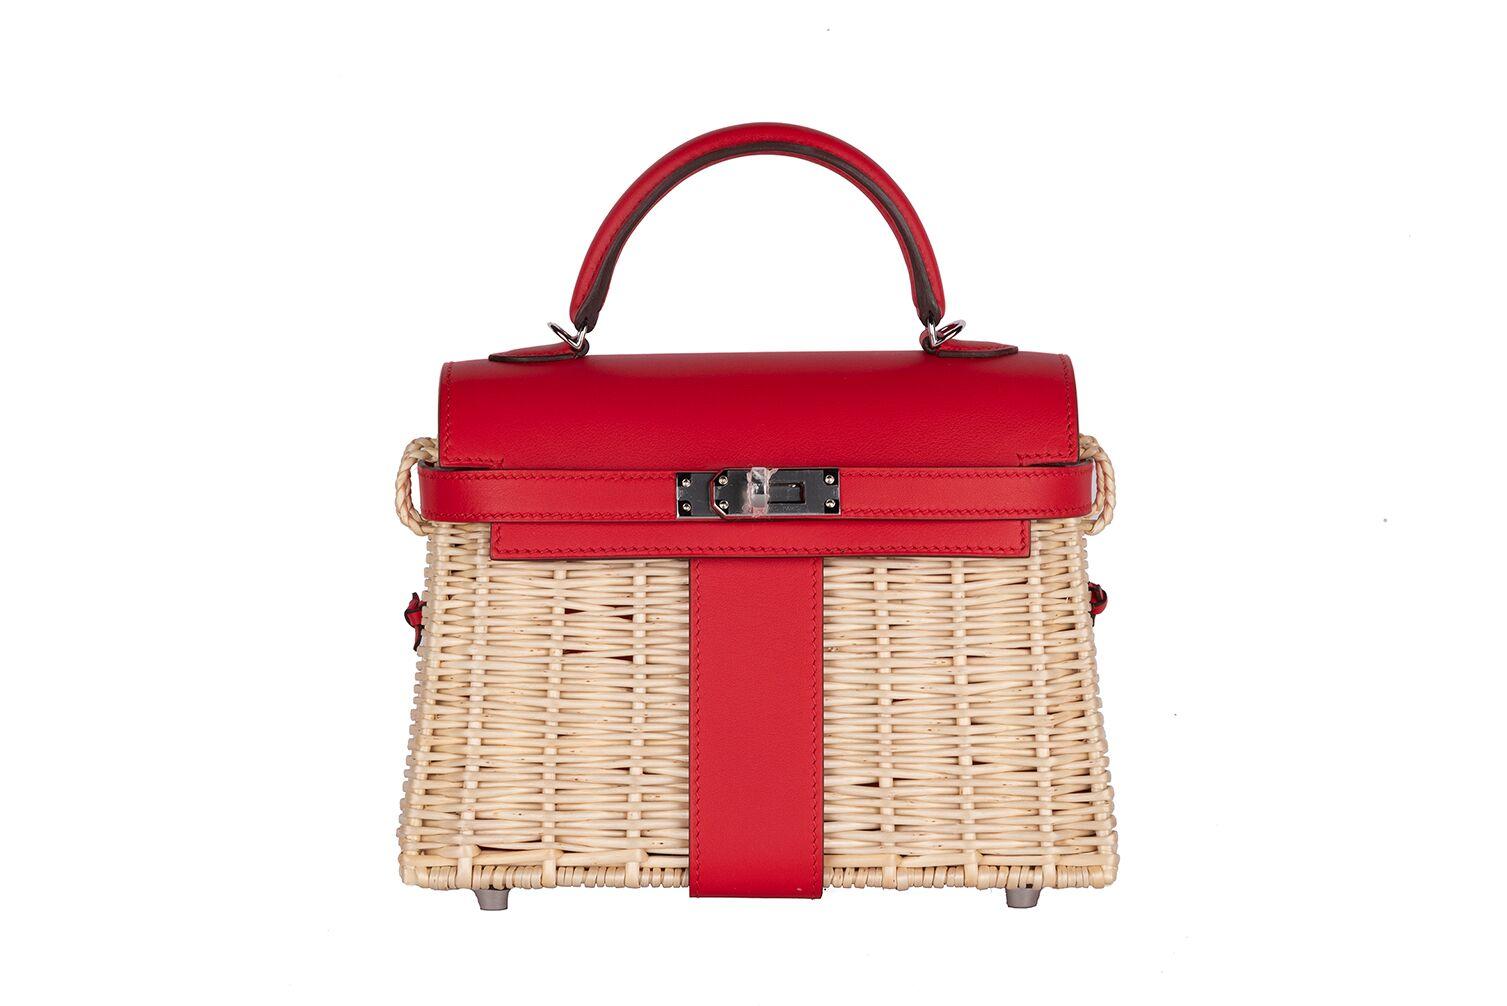 The much anticipated release of the NEW Hermes Mini Picnic Kelly 20 is finally here.
Be first
So so limited
Only a select few VIP clients were offered the opportunity to buy this bag.

Hermès Mini Picnic Kelly Bag of Rouge de Coeur swift